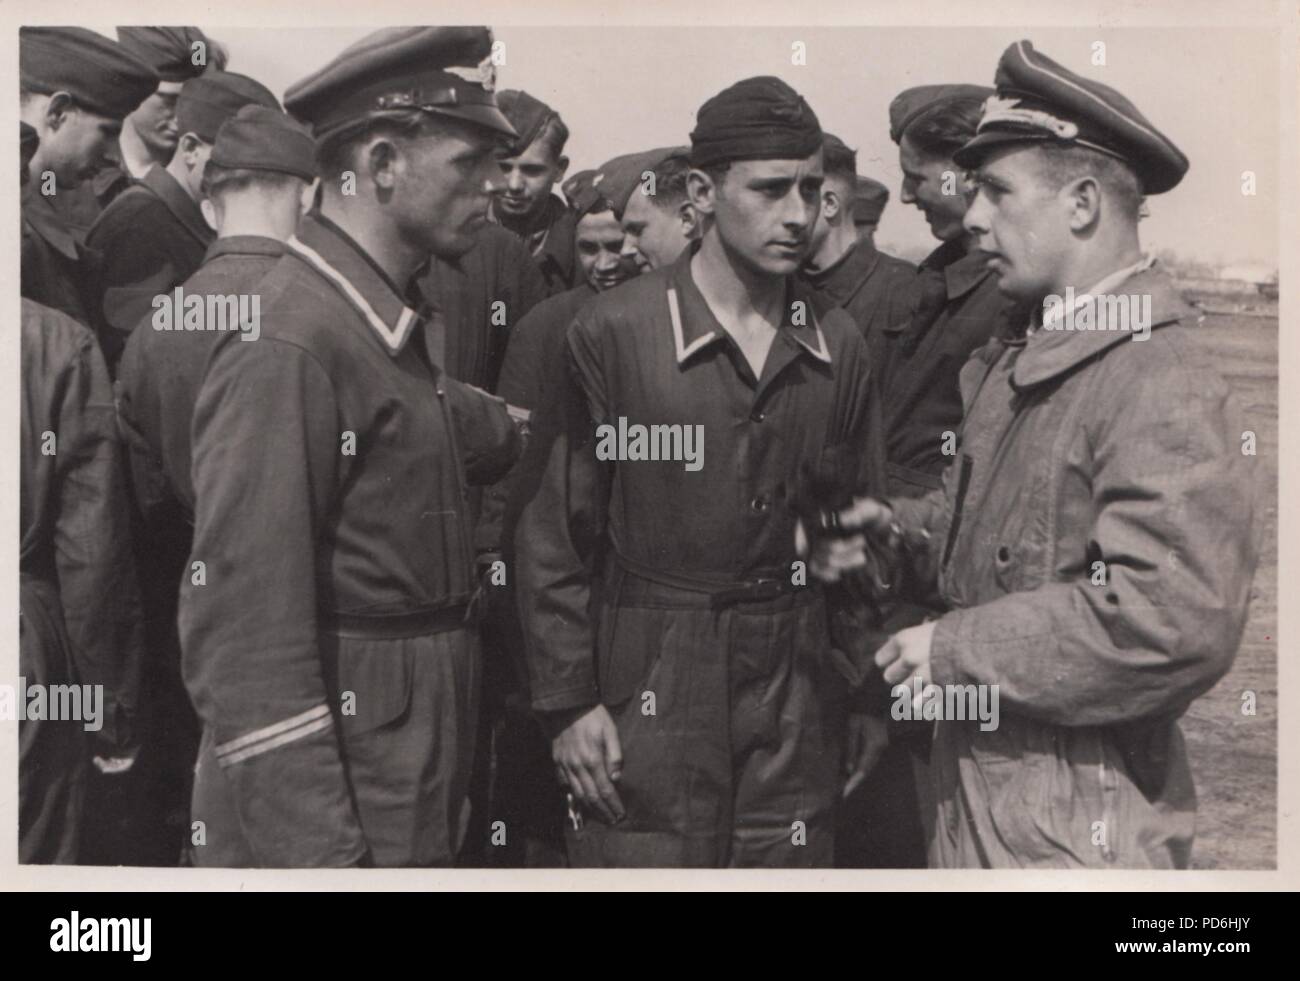 Image from the photo album of Oberleutnant Oscar Müller of  Kampfgeschwader 1: A Luftwaffe officer talks to members of the ground crew of 5. Staffel Kampfgescwader 1 'Hindenburg' at Dno Airfield in Russia, 1942. Stock Photo